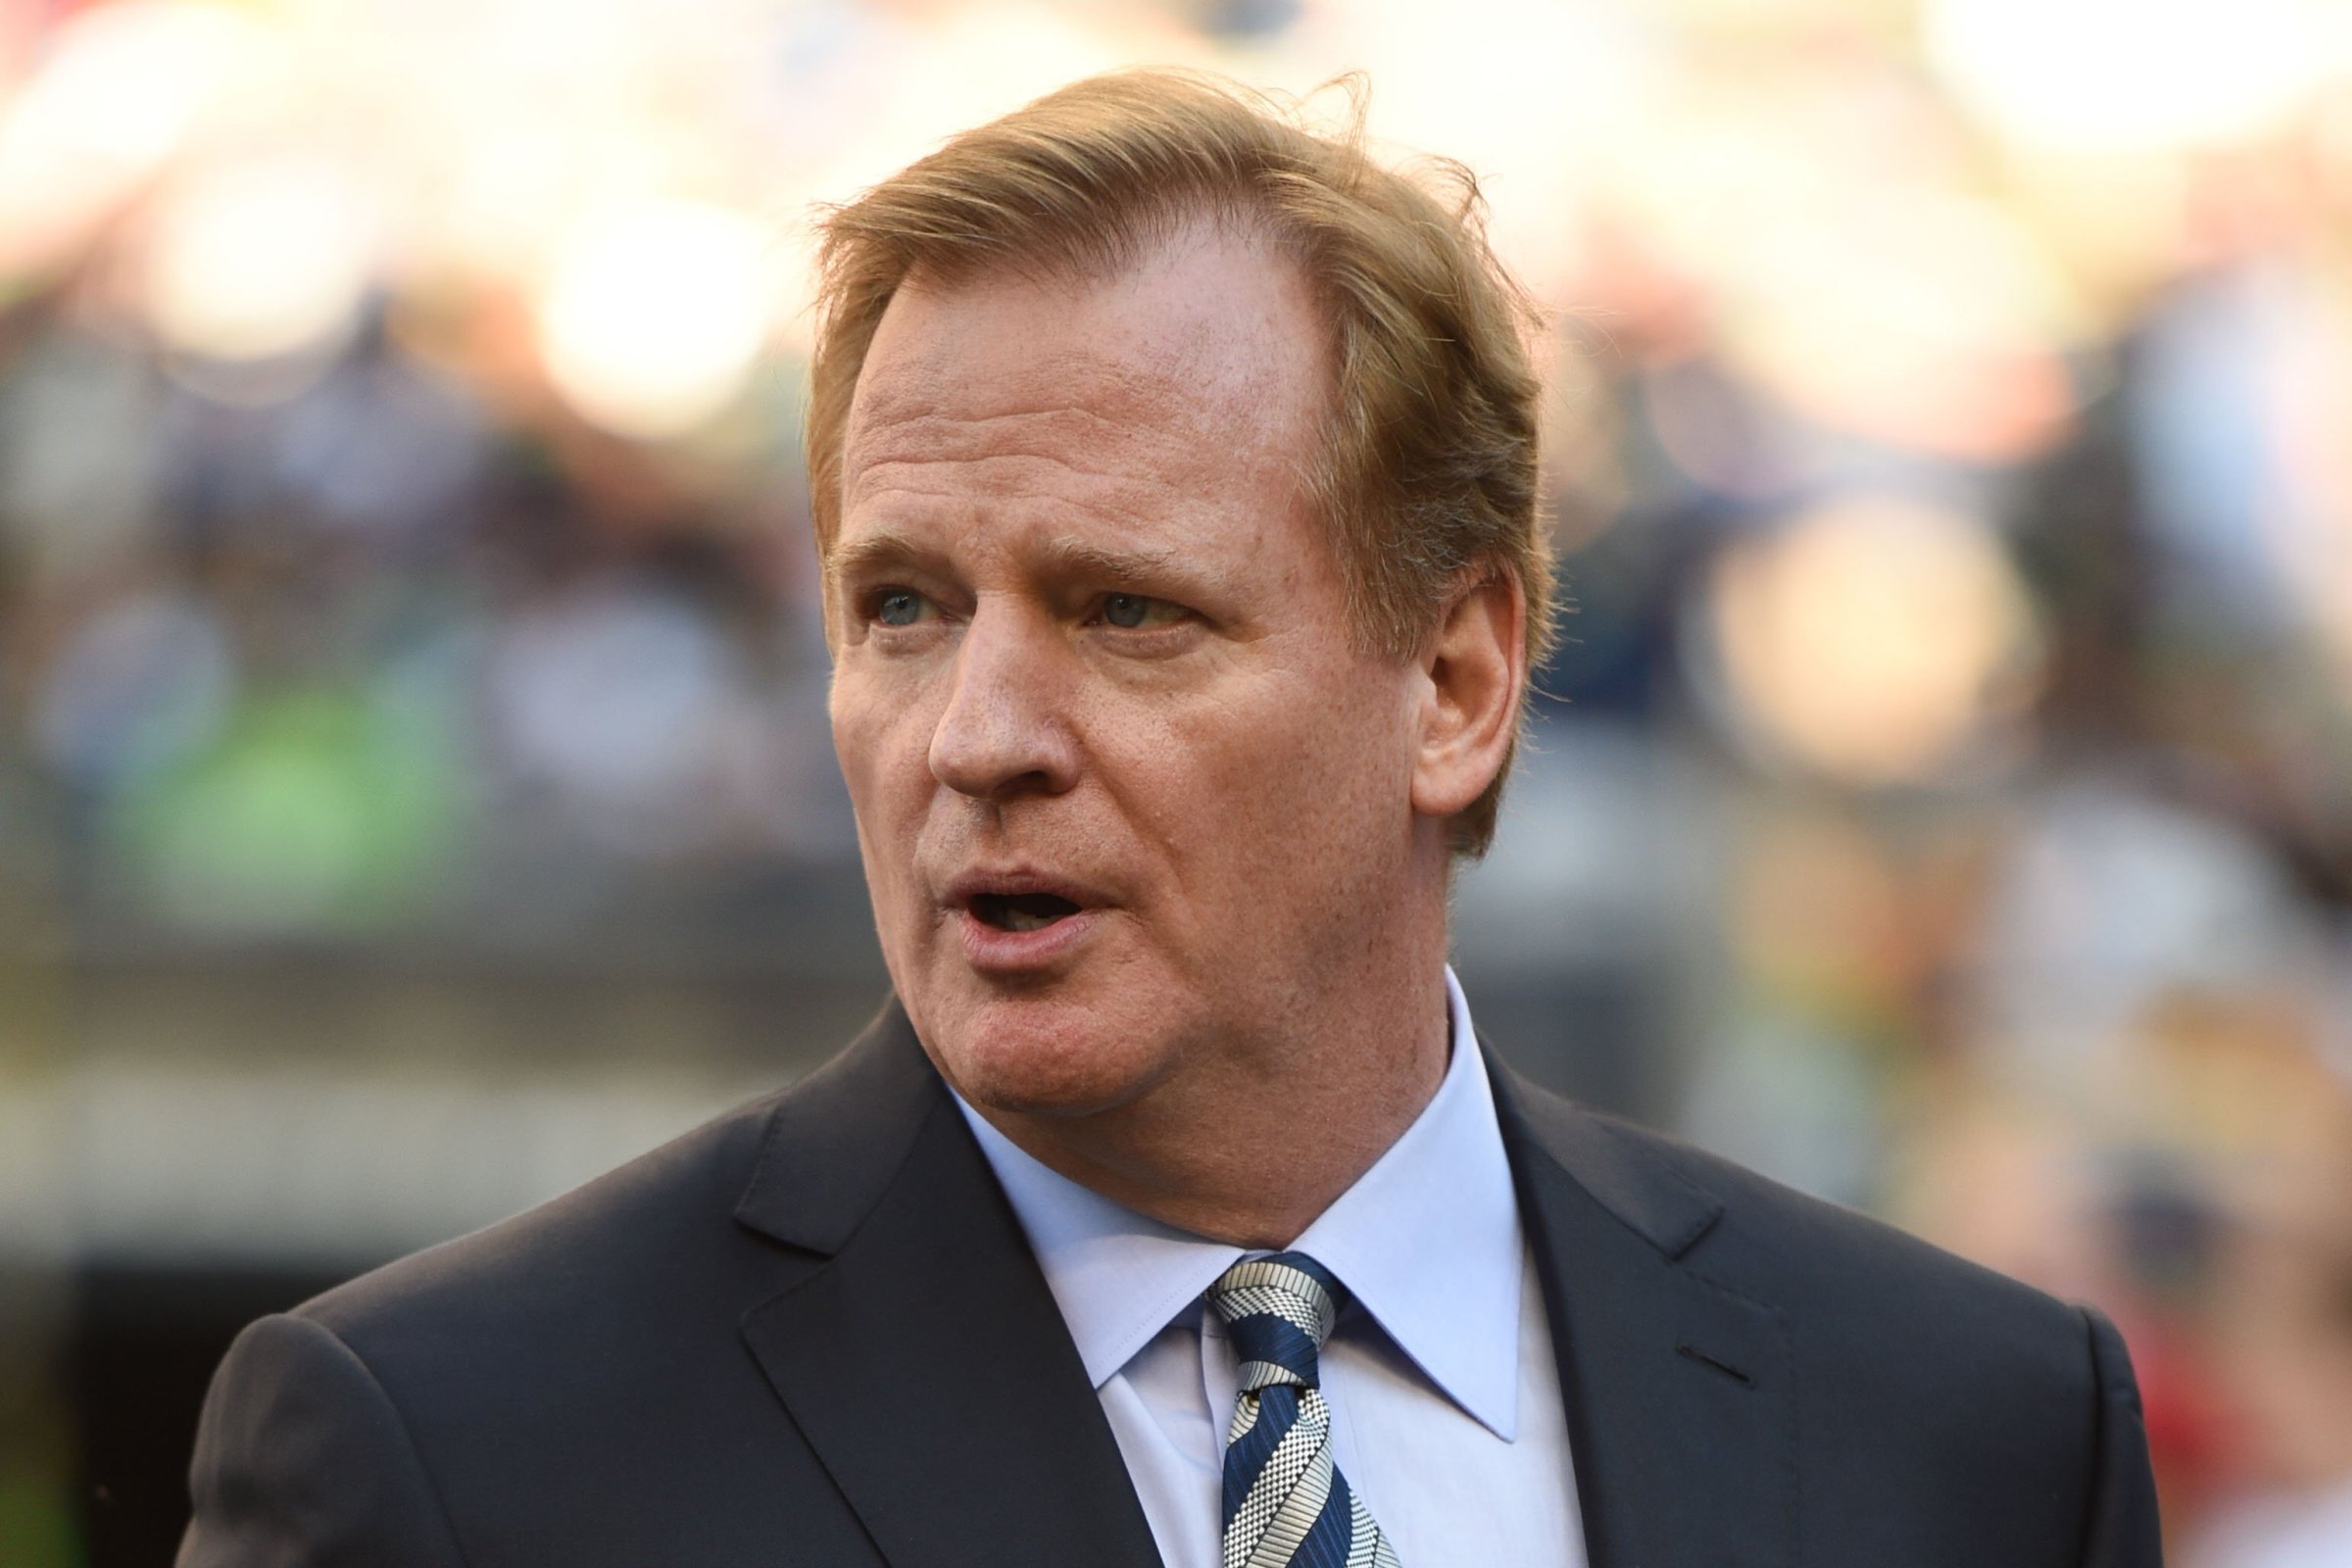 NFL commissioner Roger Goodell walks the sidelines before the game between the Seattle Seahawks and the Green Bay Packers at CenturyLink Field on Sept. 4, 2014 in Seattle.